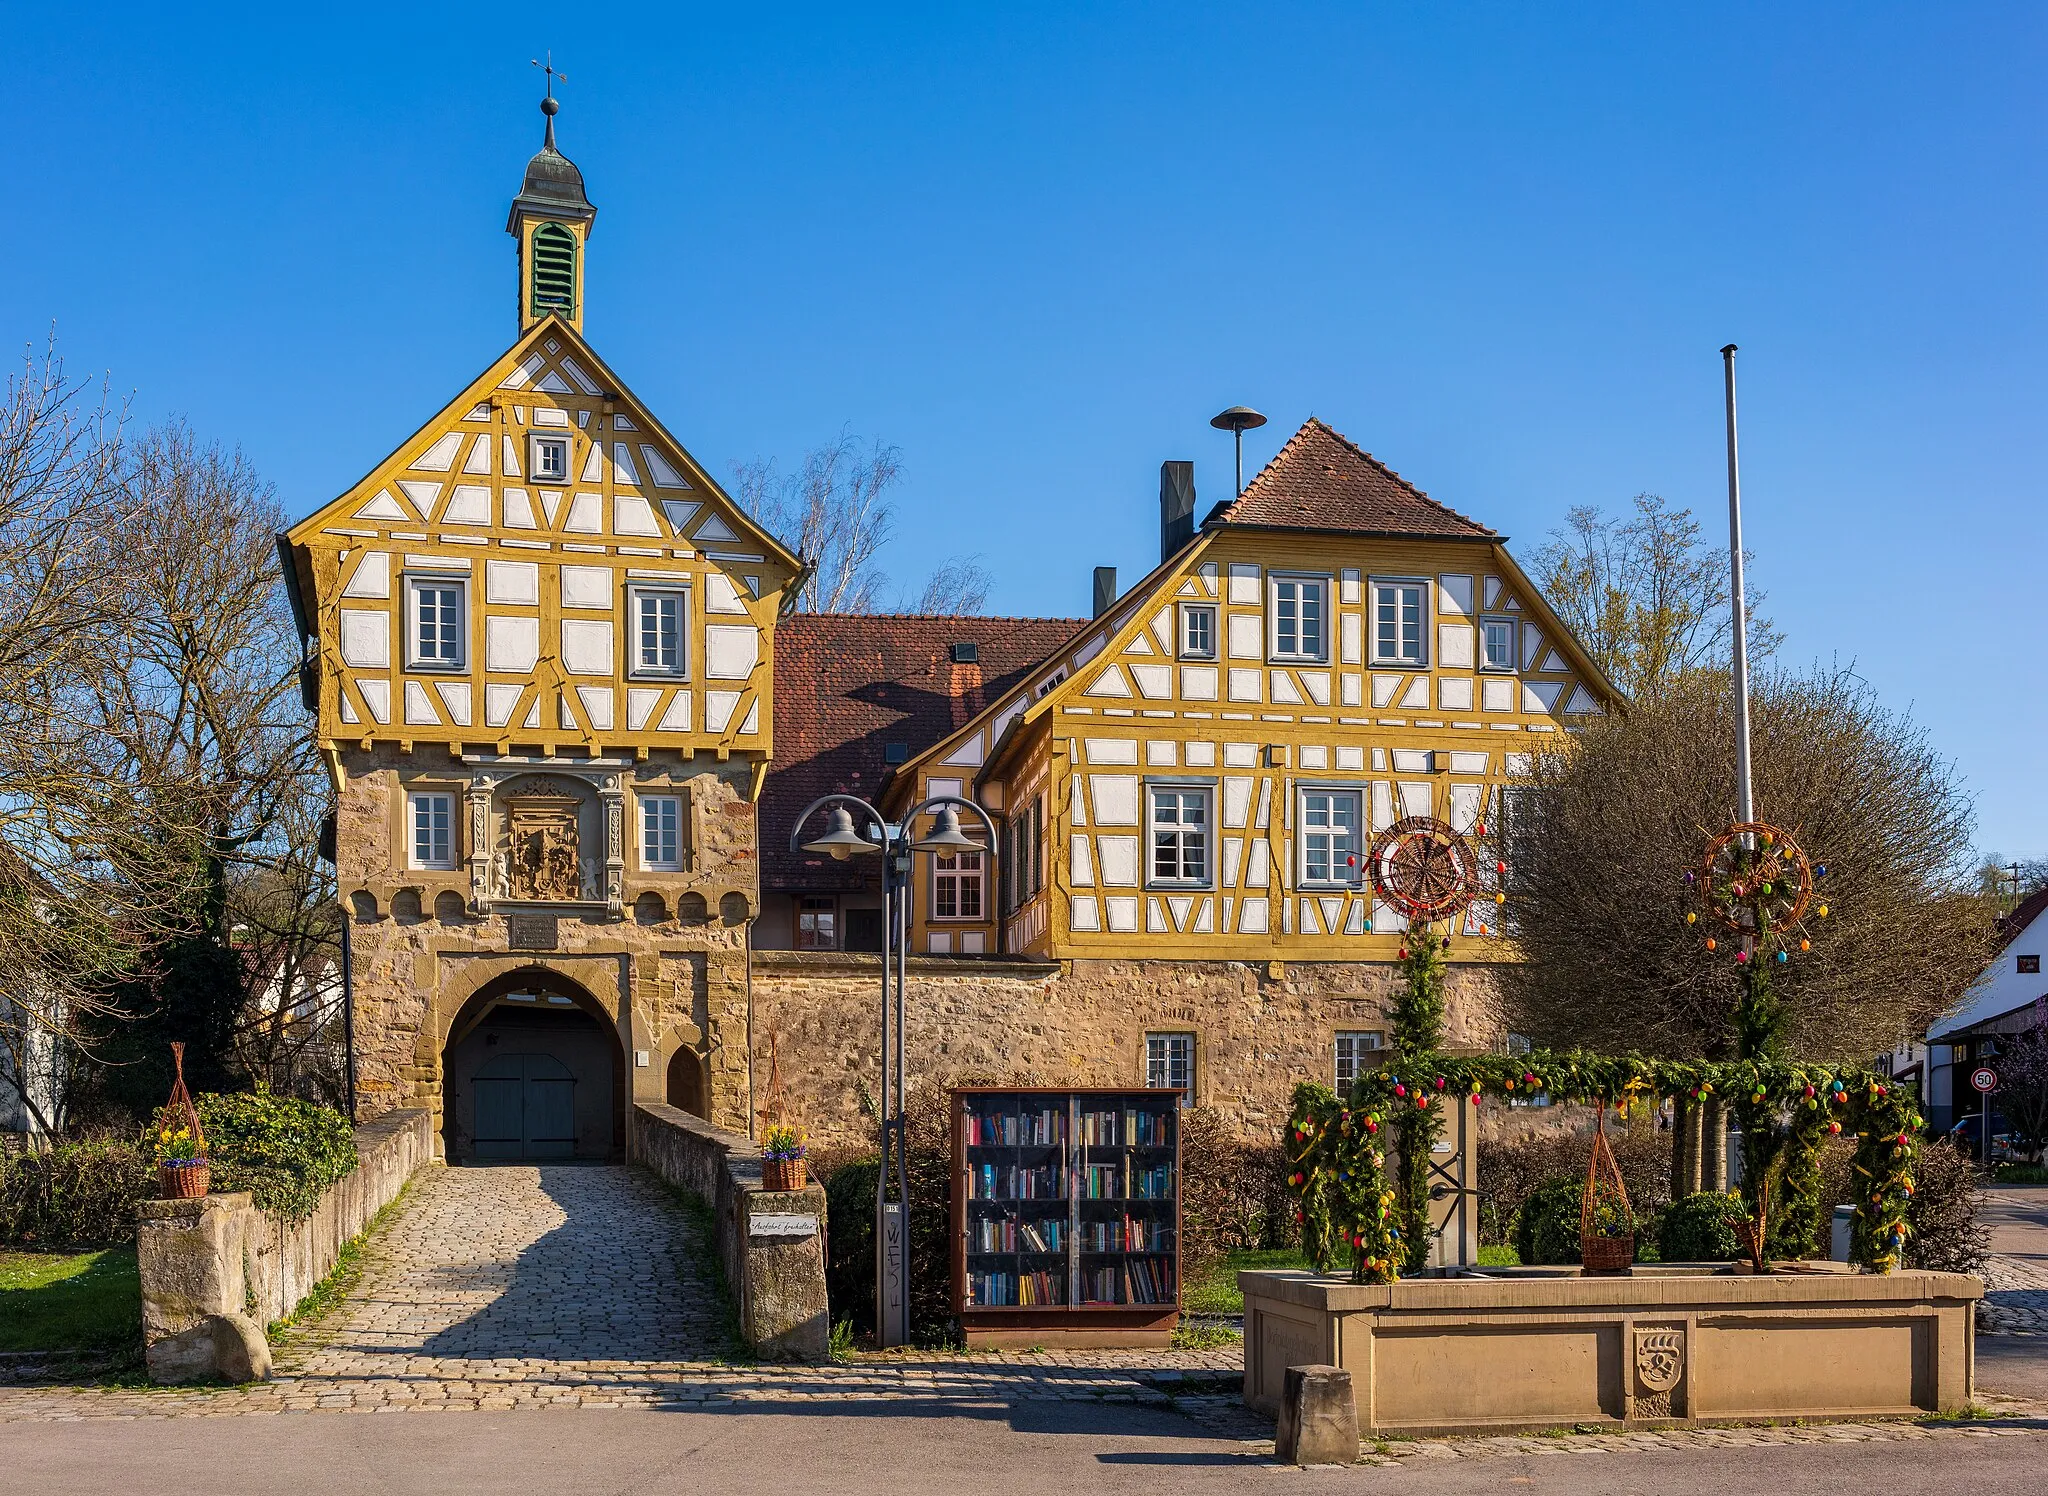 Photo showing: Steinheim an der Murr, Germany, district Höpfigheim: the so-called Schlössle (“little castle”), built in the middle ages as a moated castle and altered in the 16th century to a timber-framed manor house. View from north-northeast. At the right in the foreground the village well from 1984, here decorated as an easter fountain. Hint: The flagpole at the right was really leaning, and the walls and beams of the Schlösschen are not perfectly straight, too, in reality.